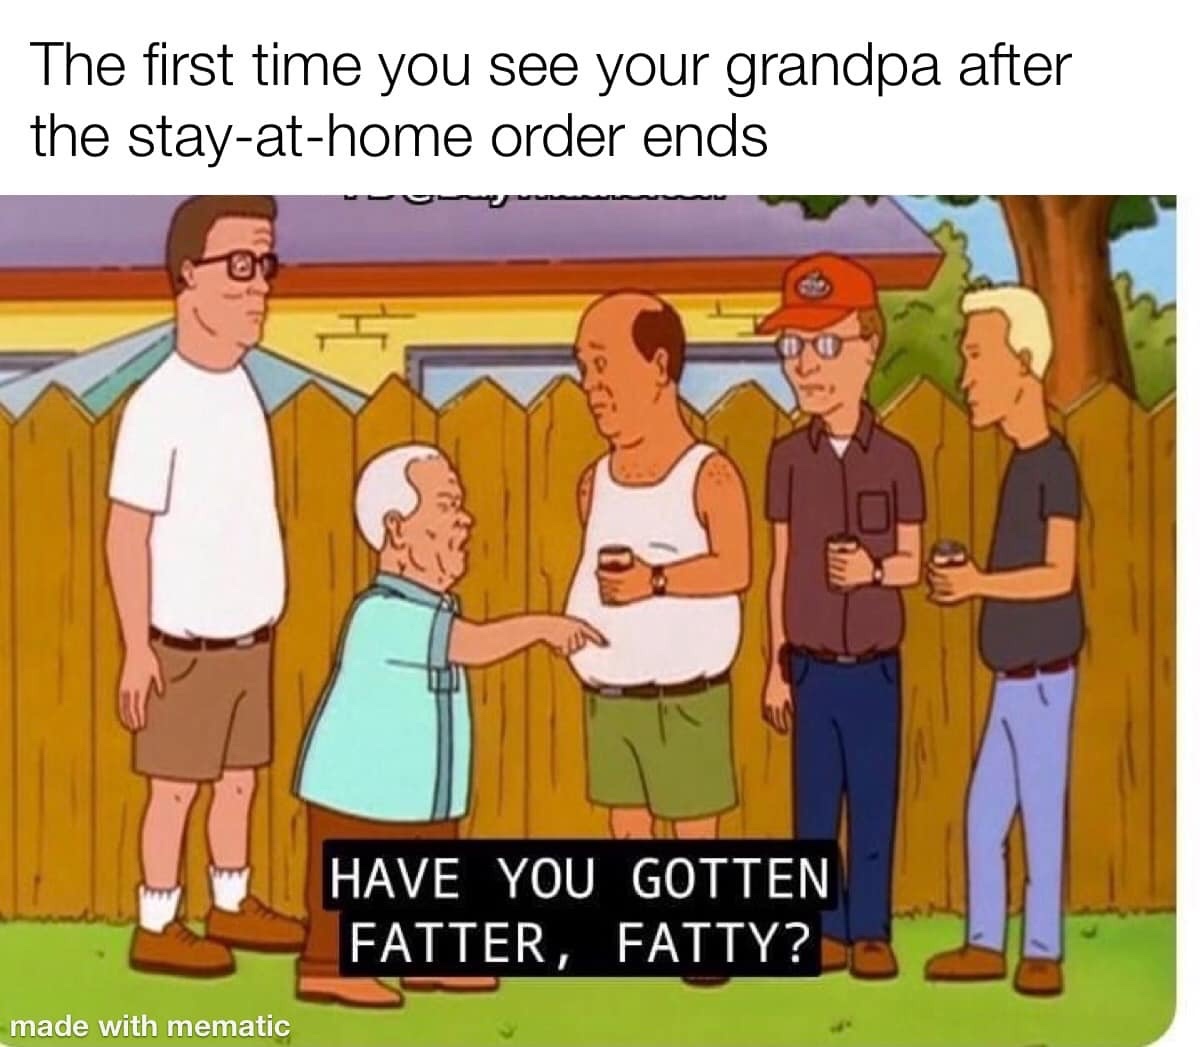 funy meme january 2020 - The first time you see your grandpa after the stayathome order ends Have You Gotten Fatter, Fatty? made with mematic